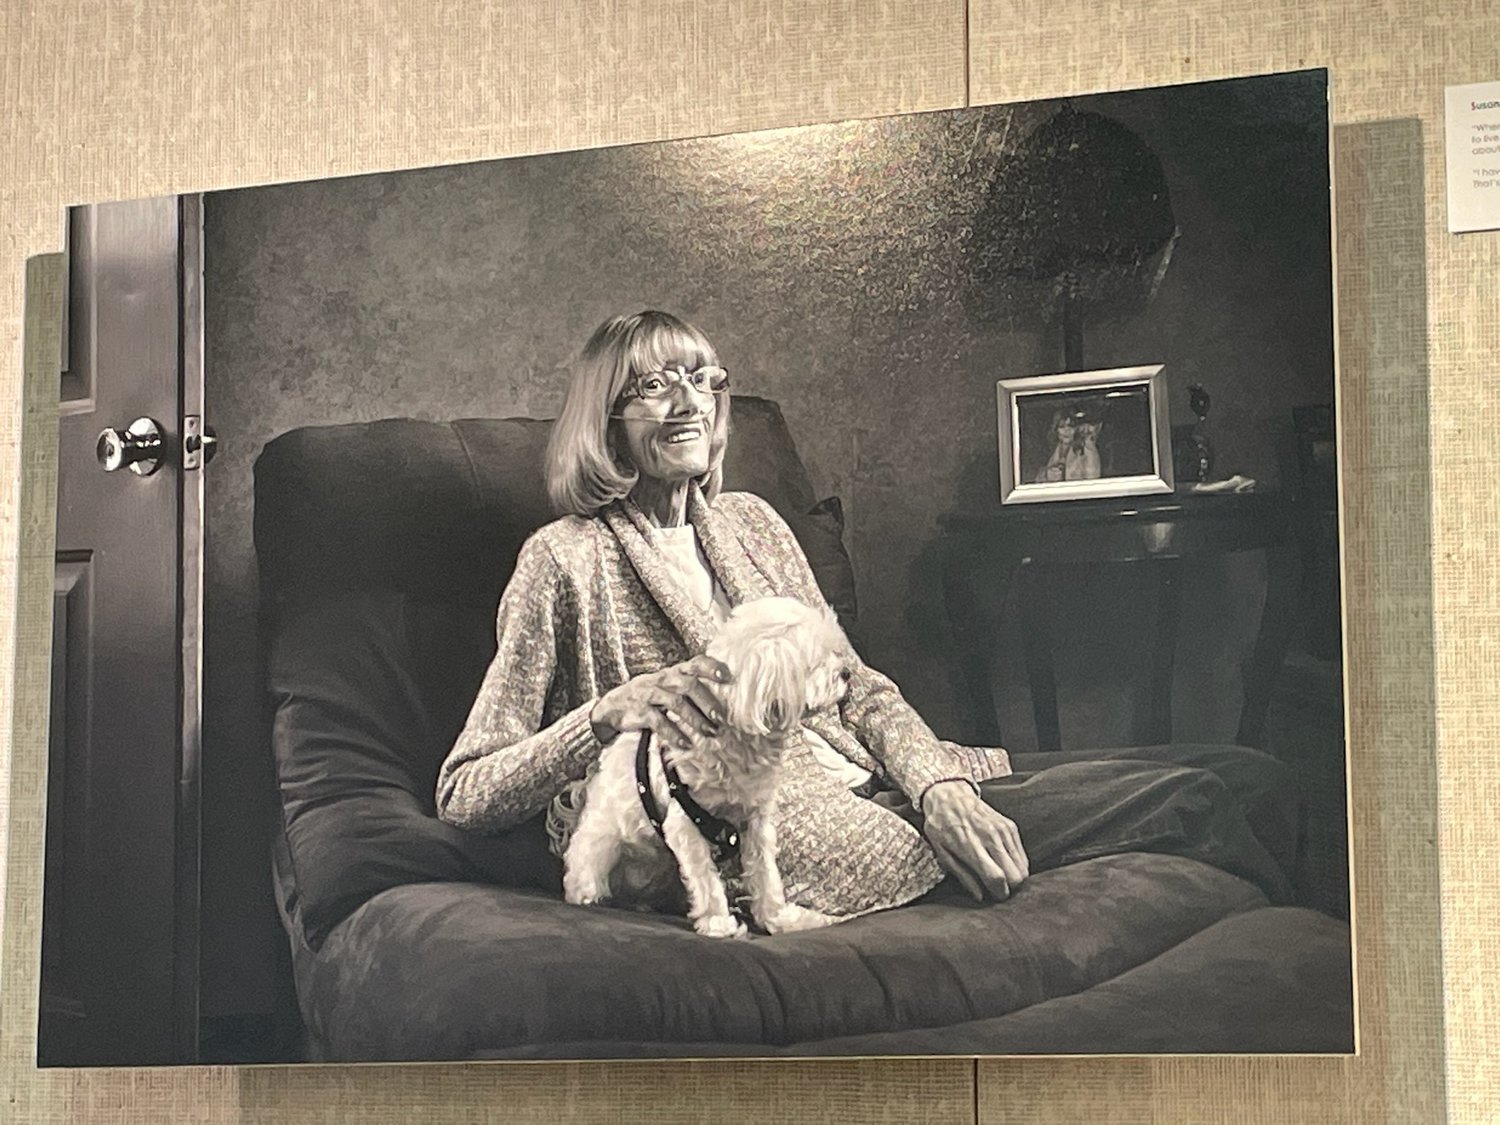 The portrait of Susan Delahunt, of Rome, 1951-2015, is among those on display in "The Last Portrait: Reflections at the End of Life" exhibit on display at Donald G. Butcher Library at the SUNY Morrisville campus.